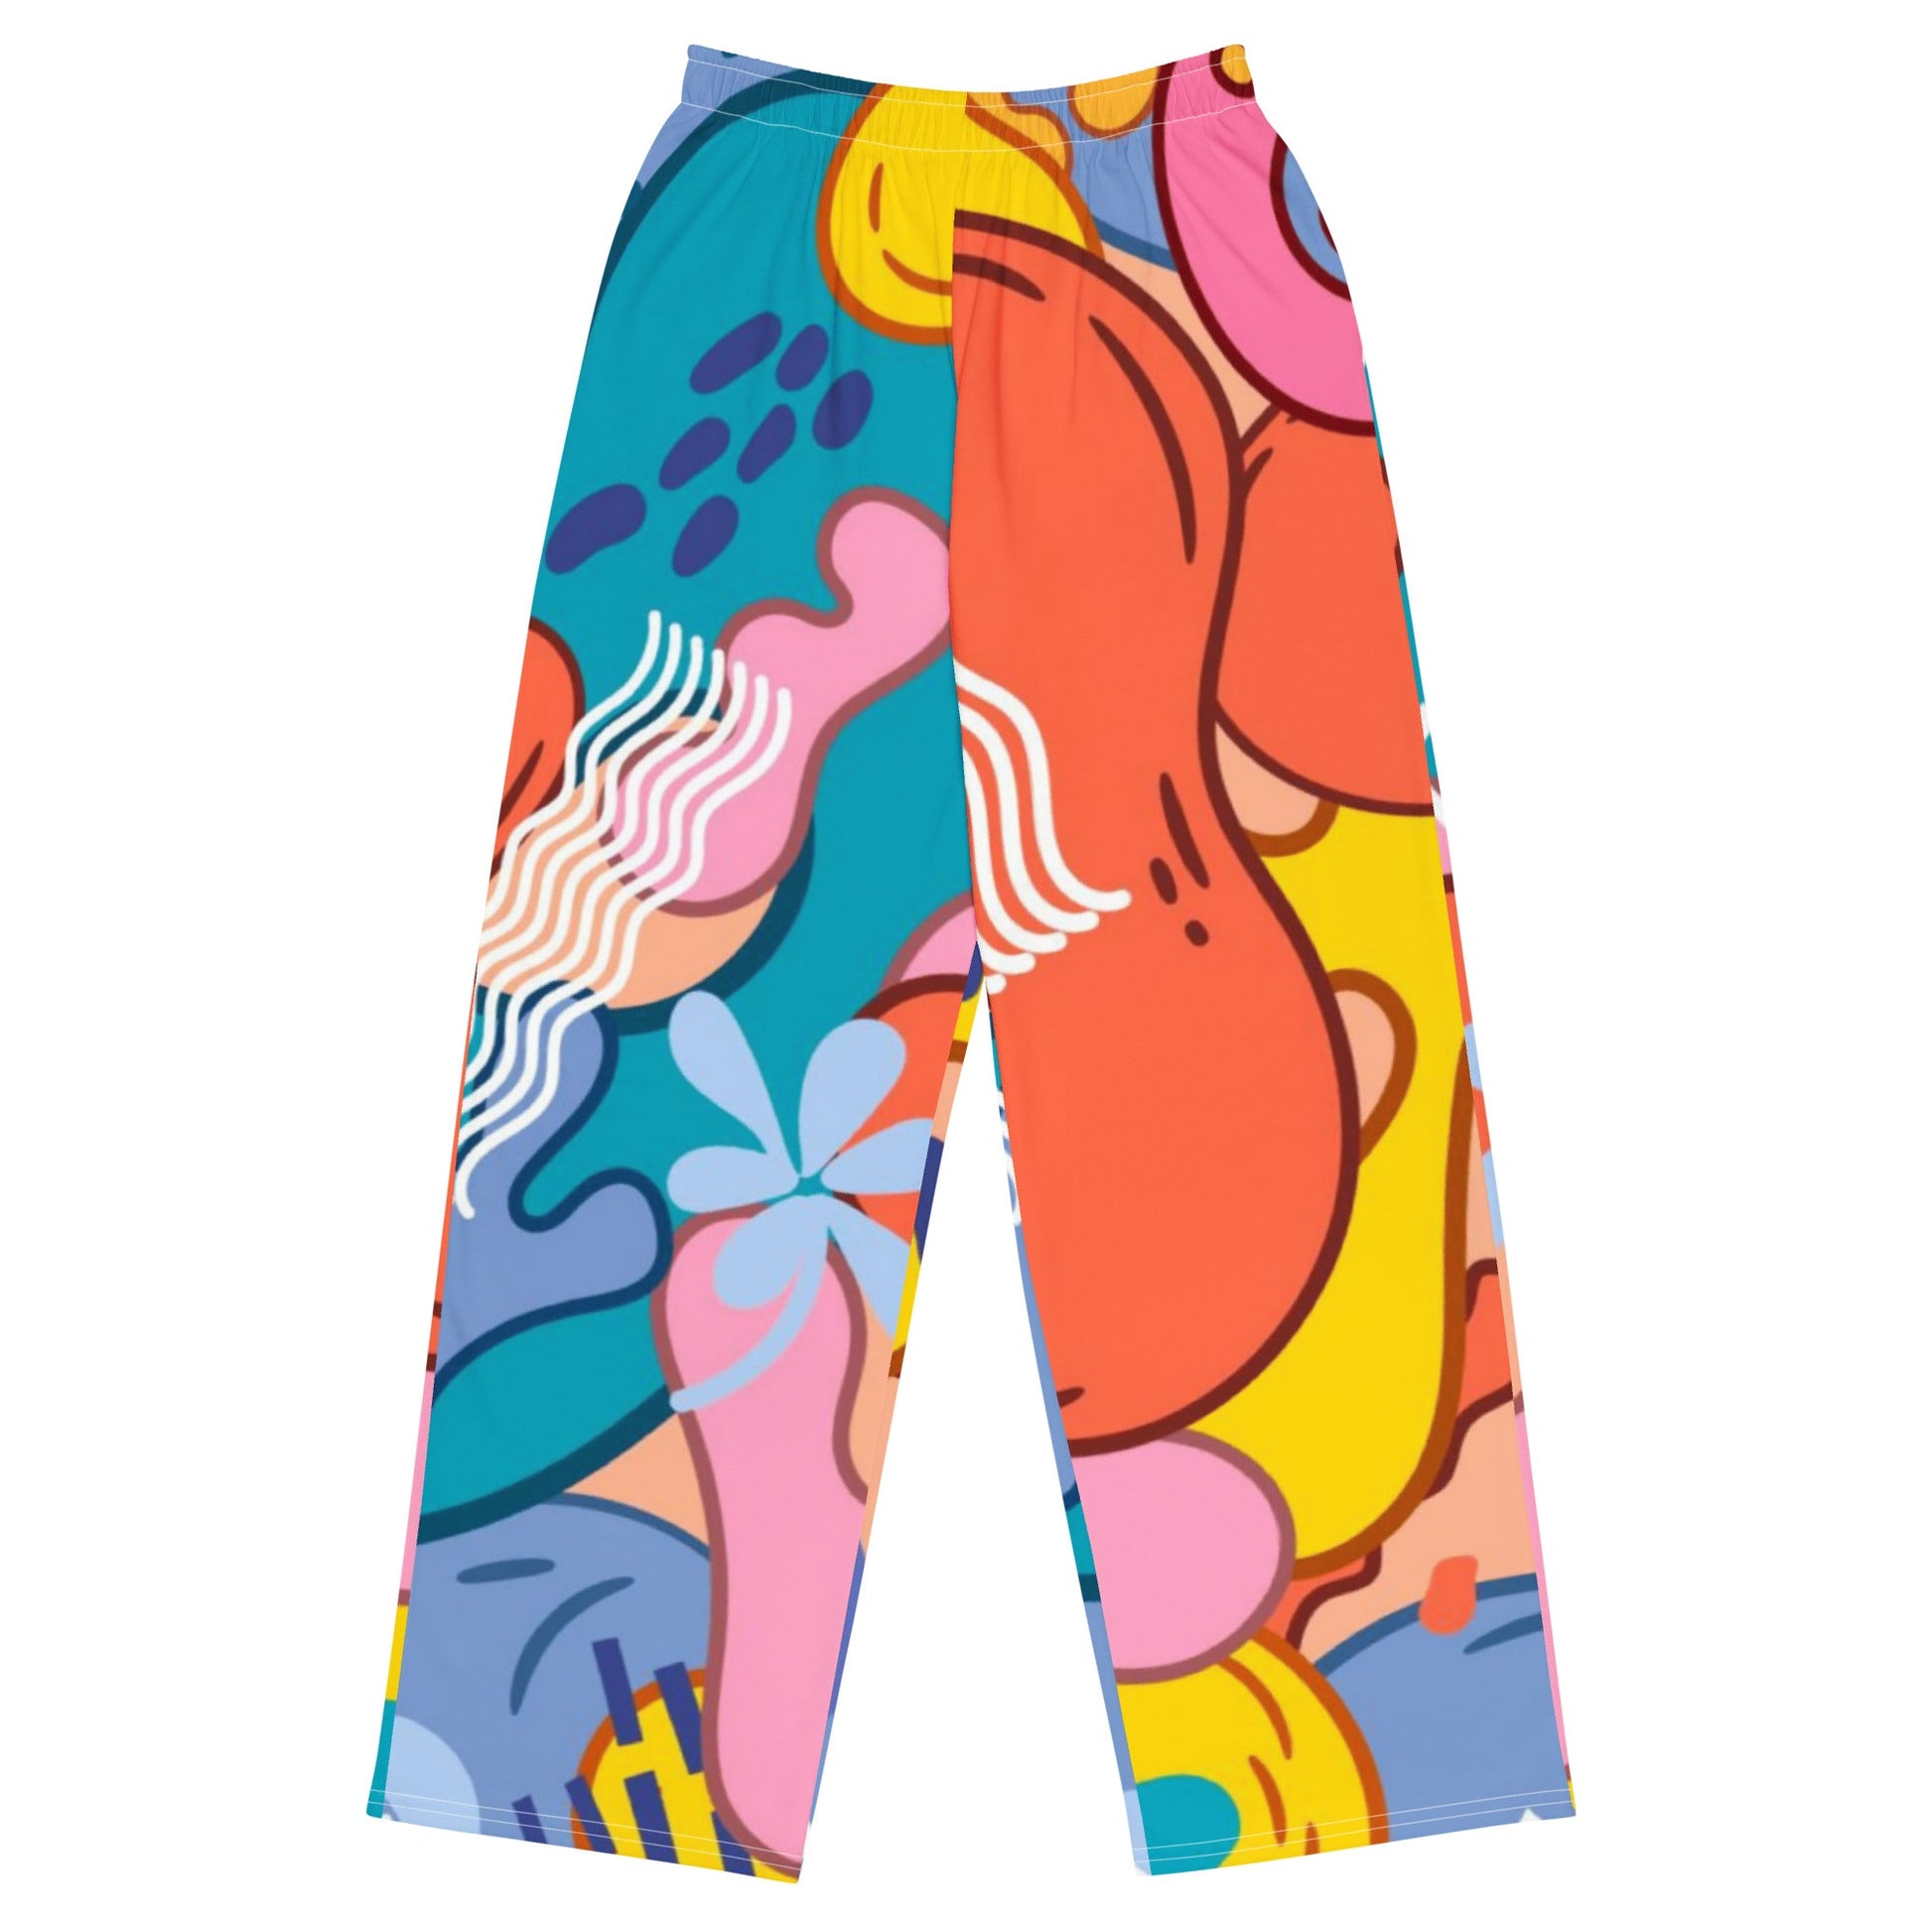 Vibrant All-Over Print Unisex Wide-Leg Pants - Colorful, Playful, and Stylish